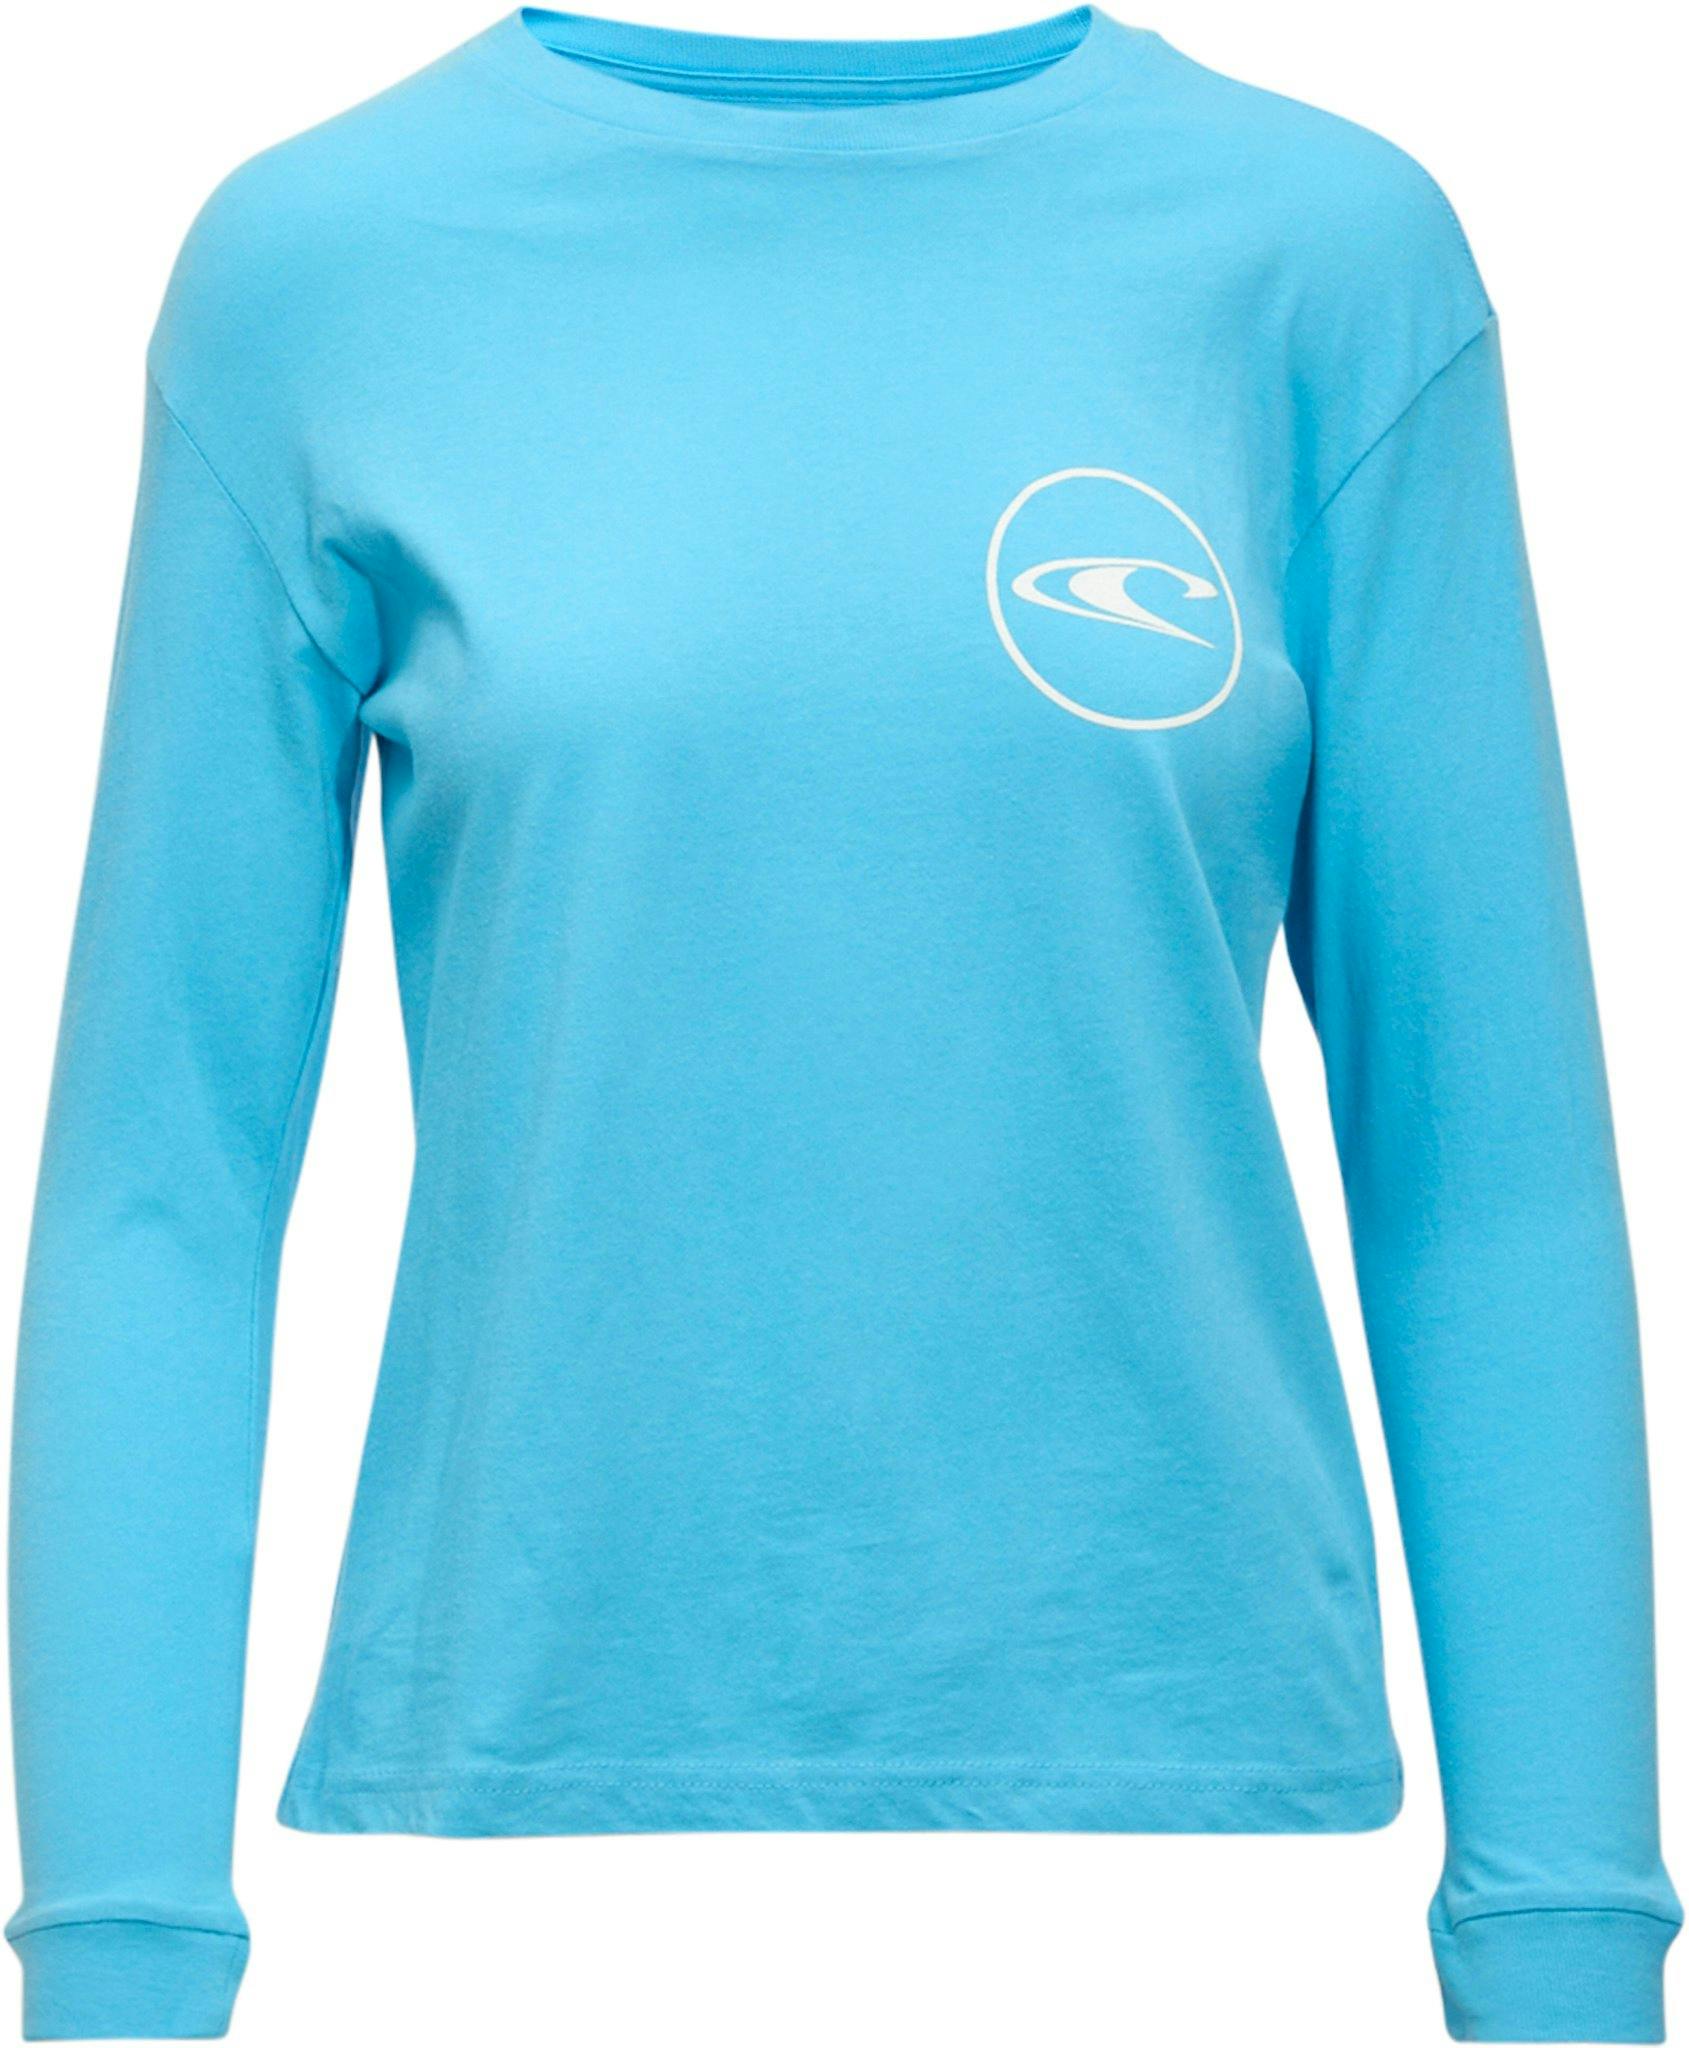 Product image for Swoop Long Sleeve Tee - Boys